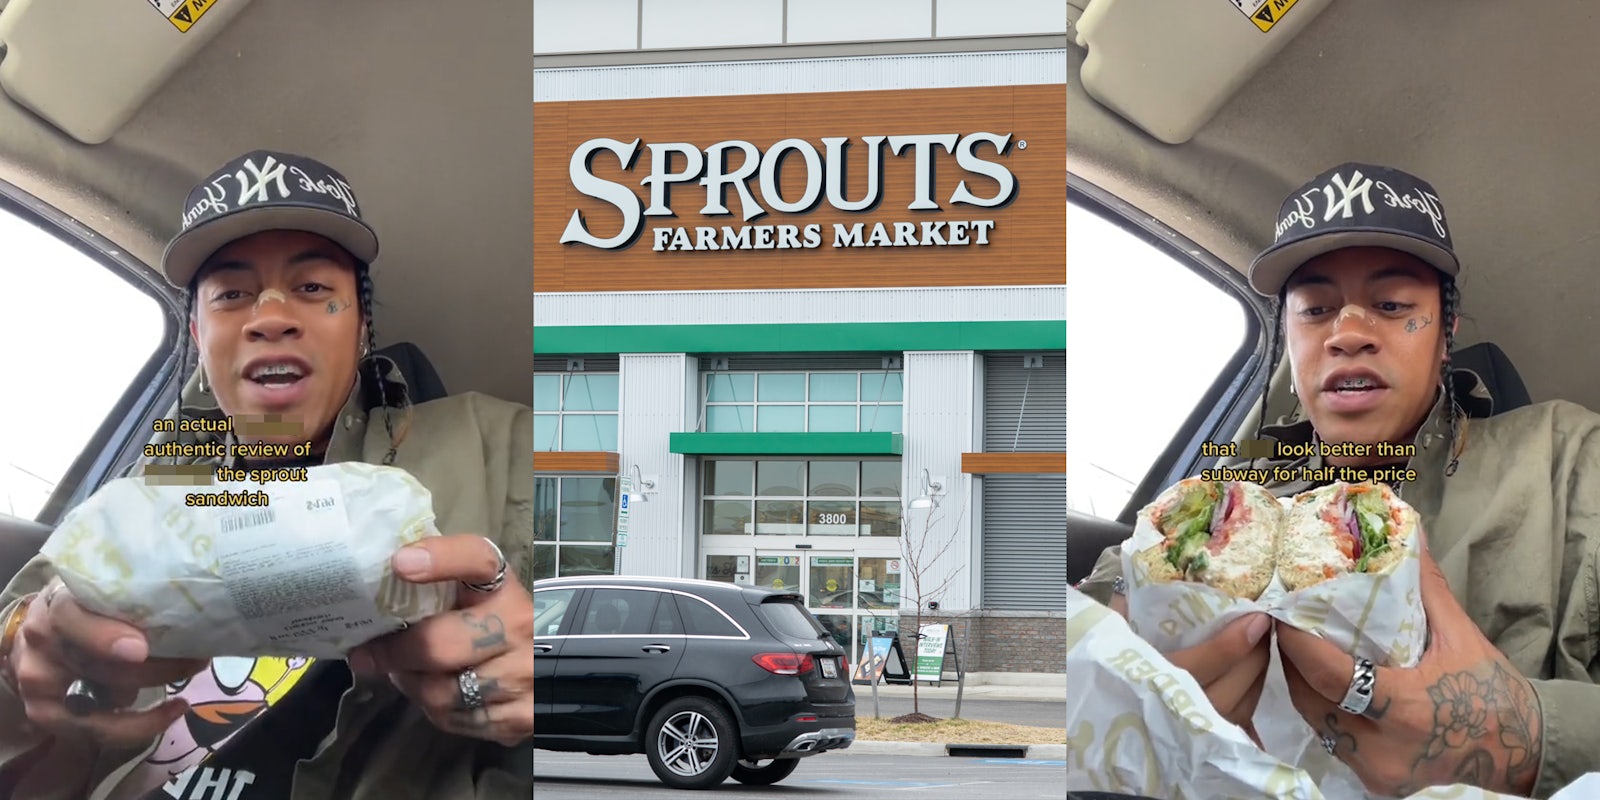 Sprouts customer speaking in car with sandwich and caption 'an actual blank authentic review of blank the sprout sandwich' (l) Sprouts Farmers Market building entrance with sign (c) Sprouts customer speaking in car with sandwich and caption 'that blank look better than subway for half the price' (r)